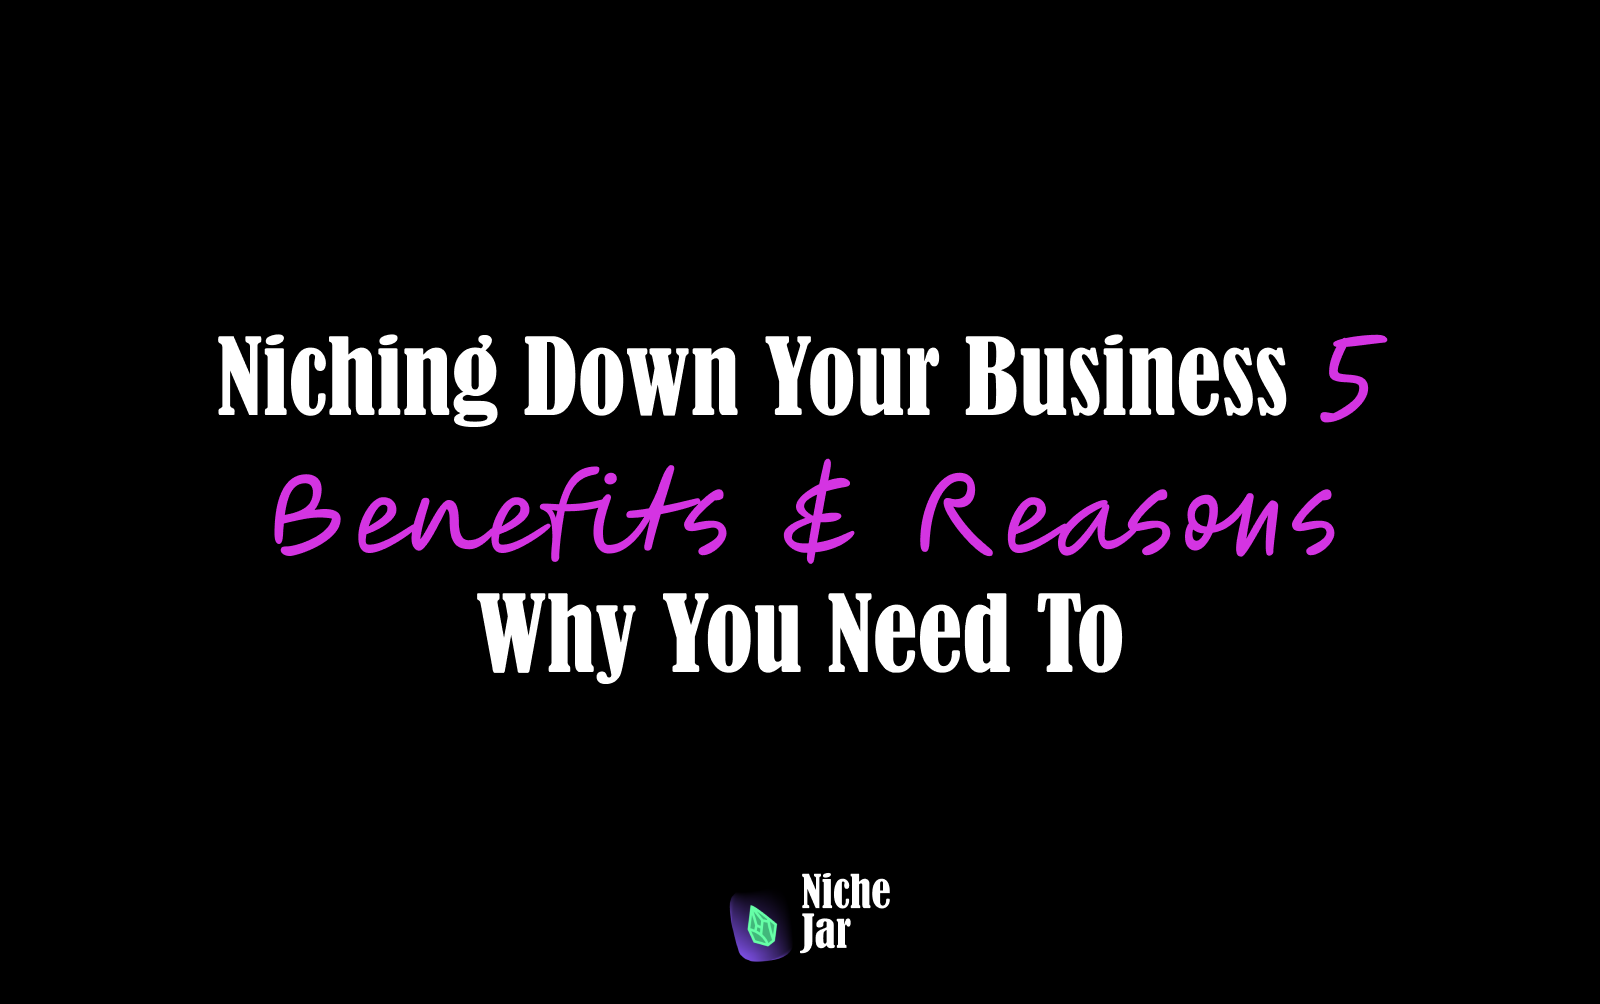 Niching Down Your Business - 5 Benefits & Reasons Why You Need To